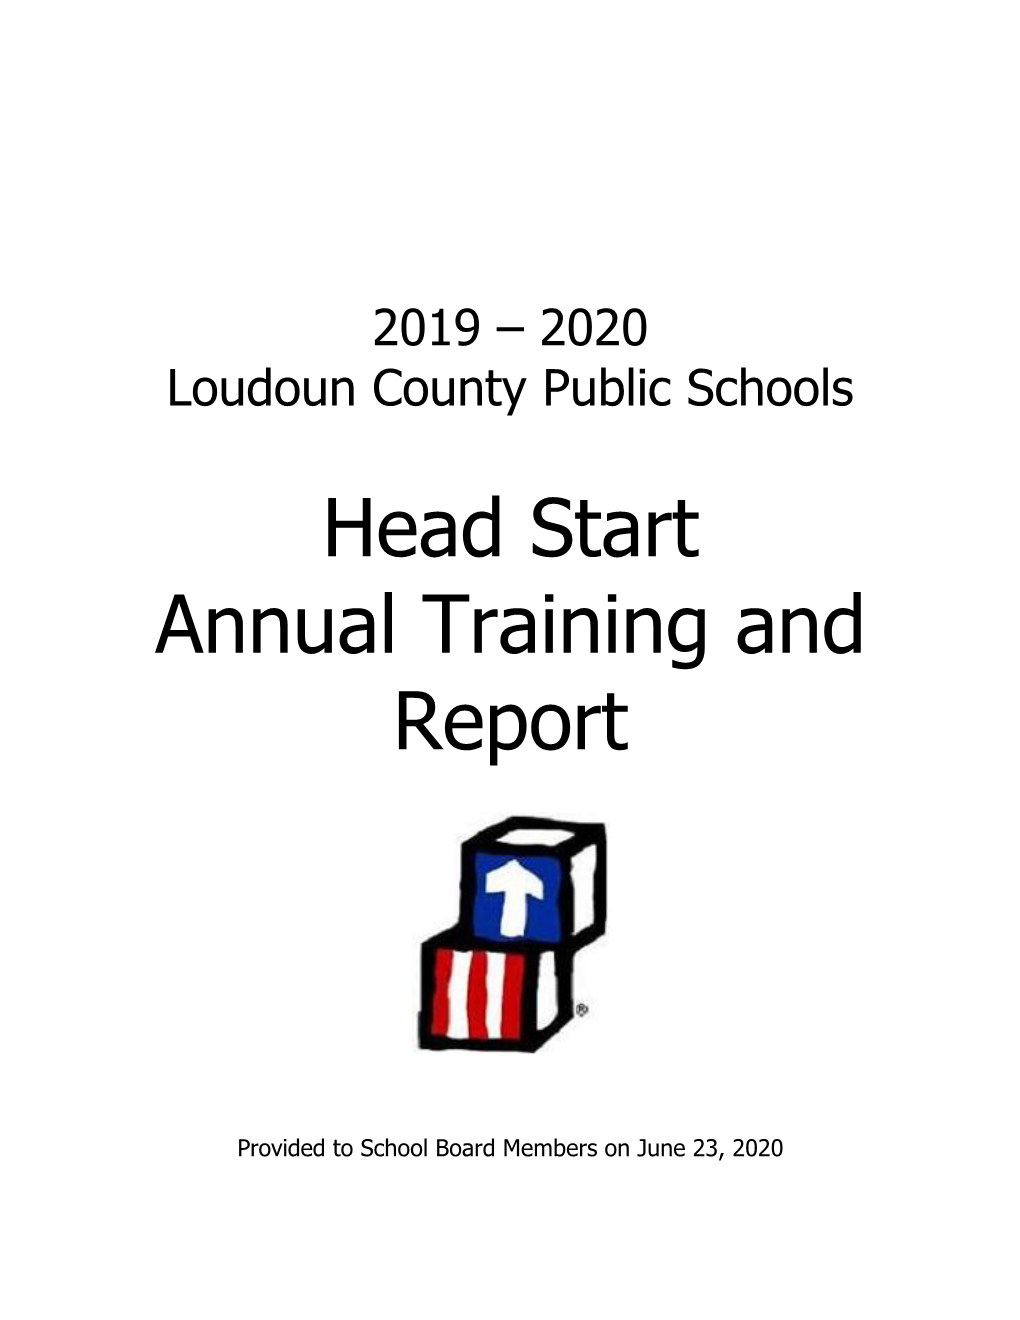 Head Start Annual Training and Report